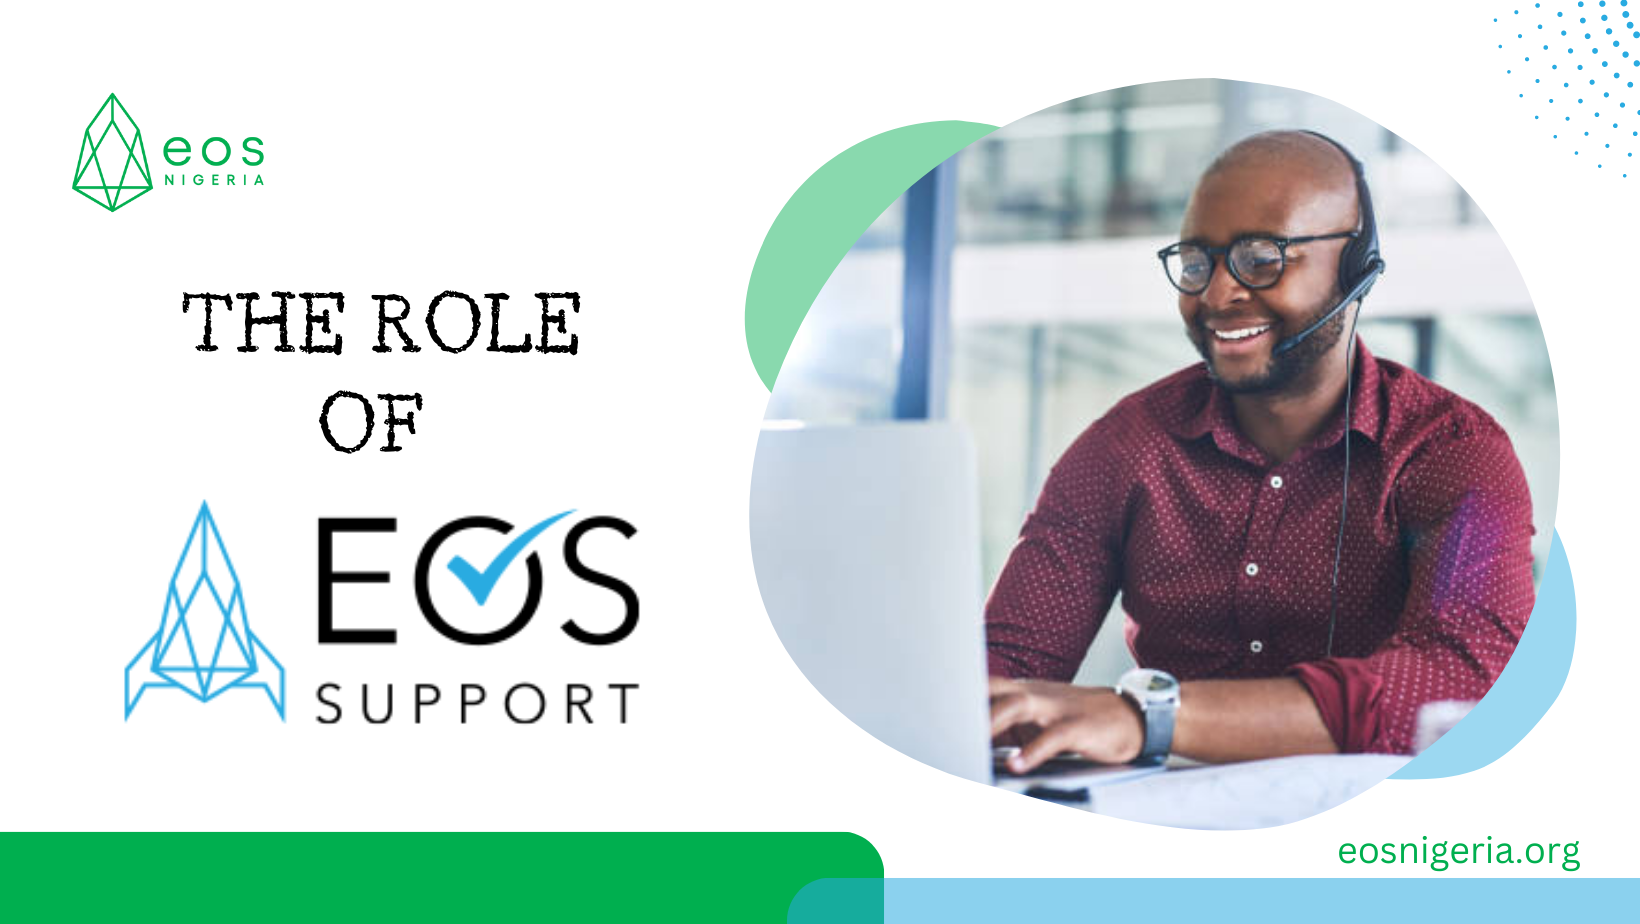 ROLE OF EOS SUPPORT